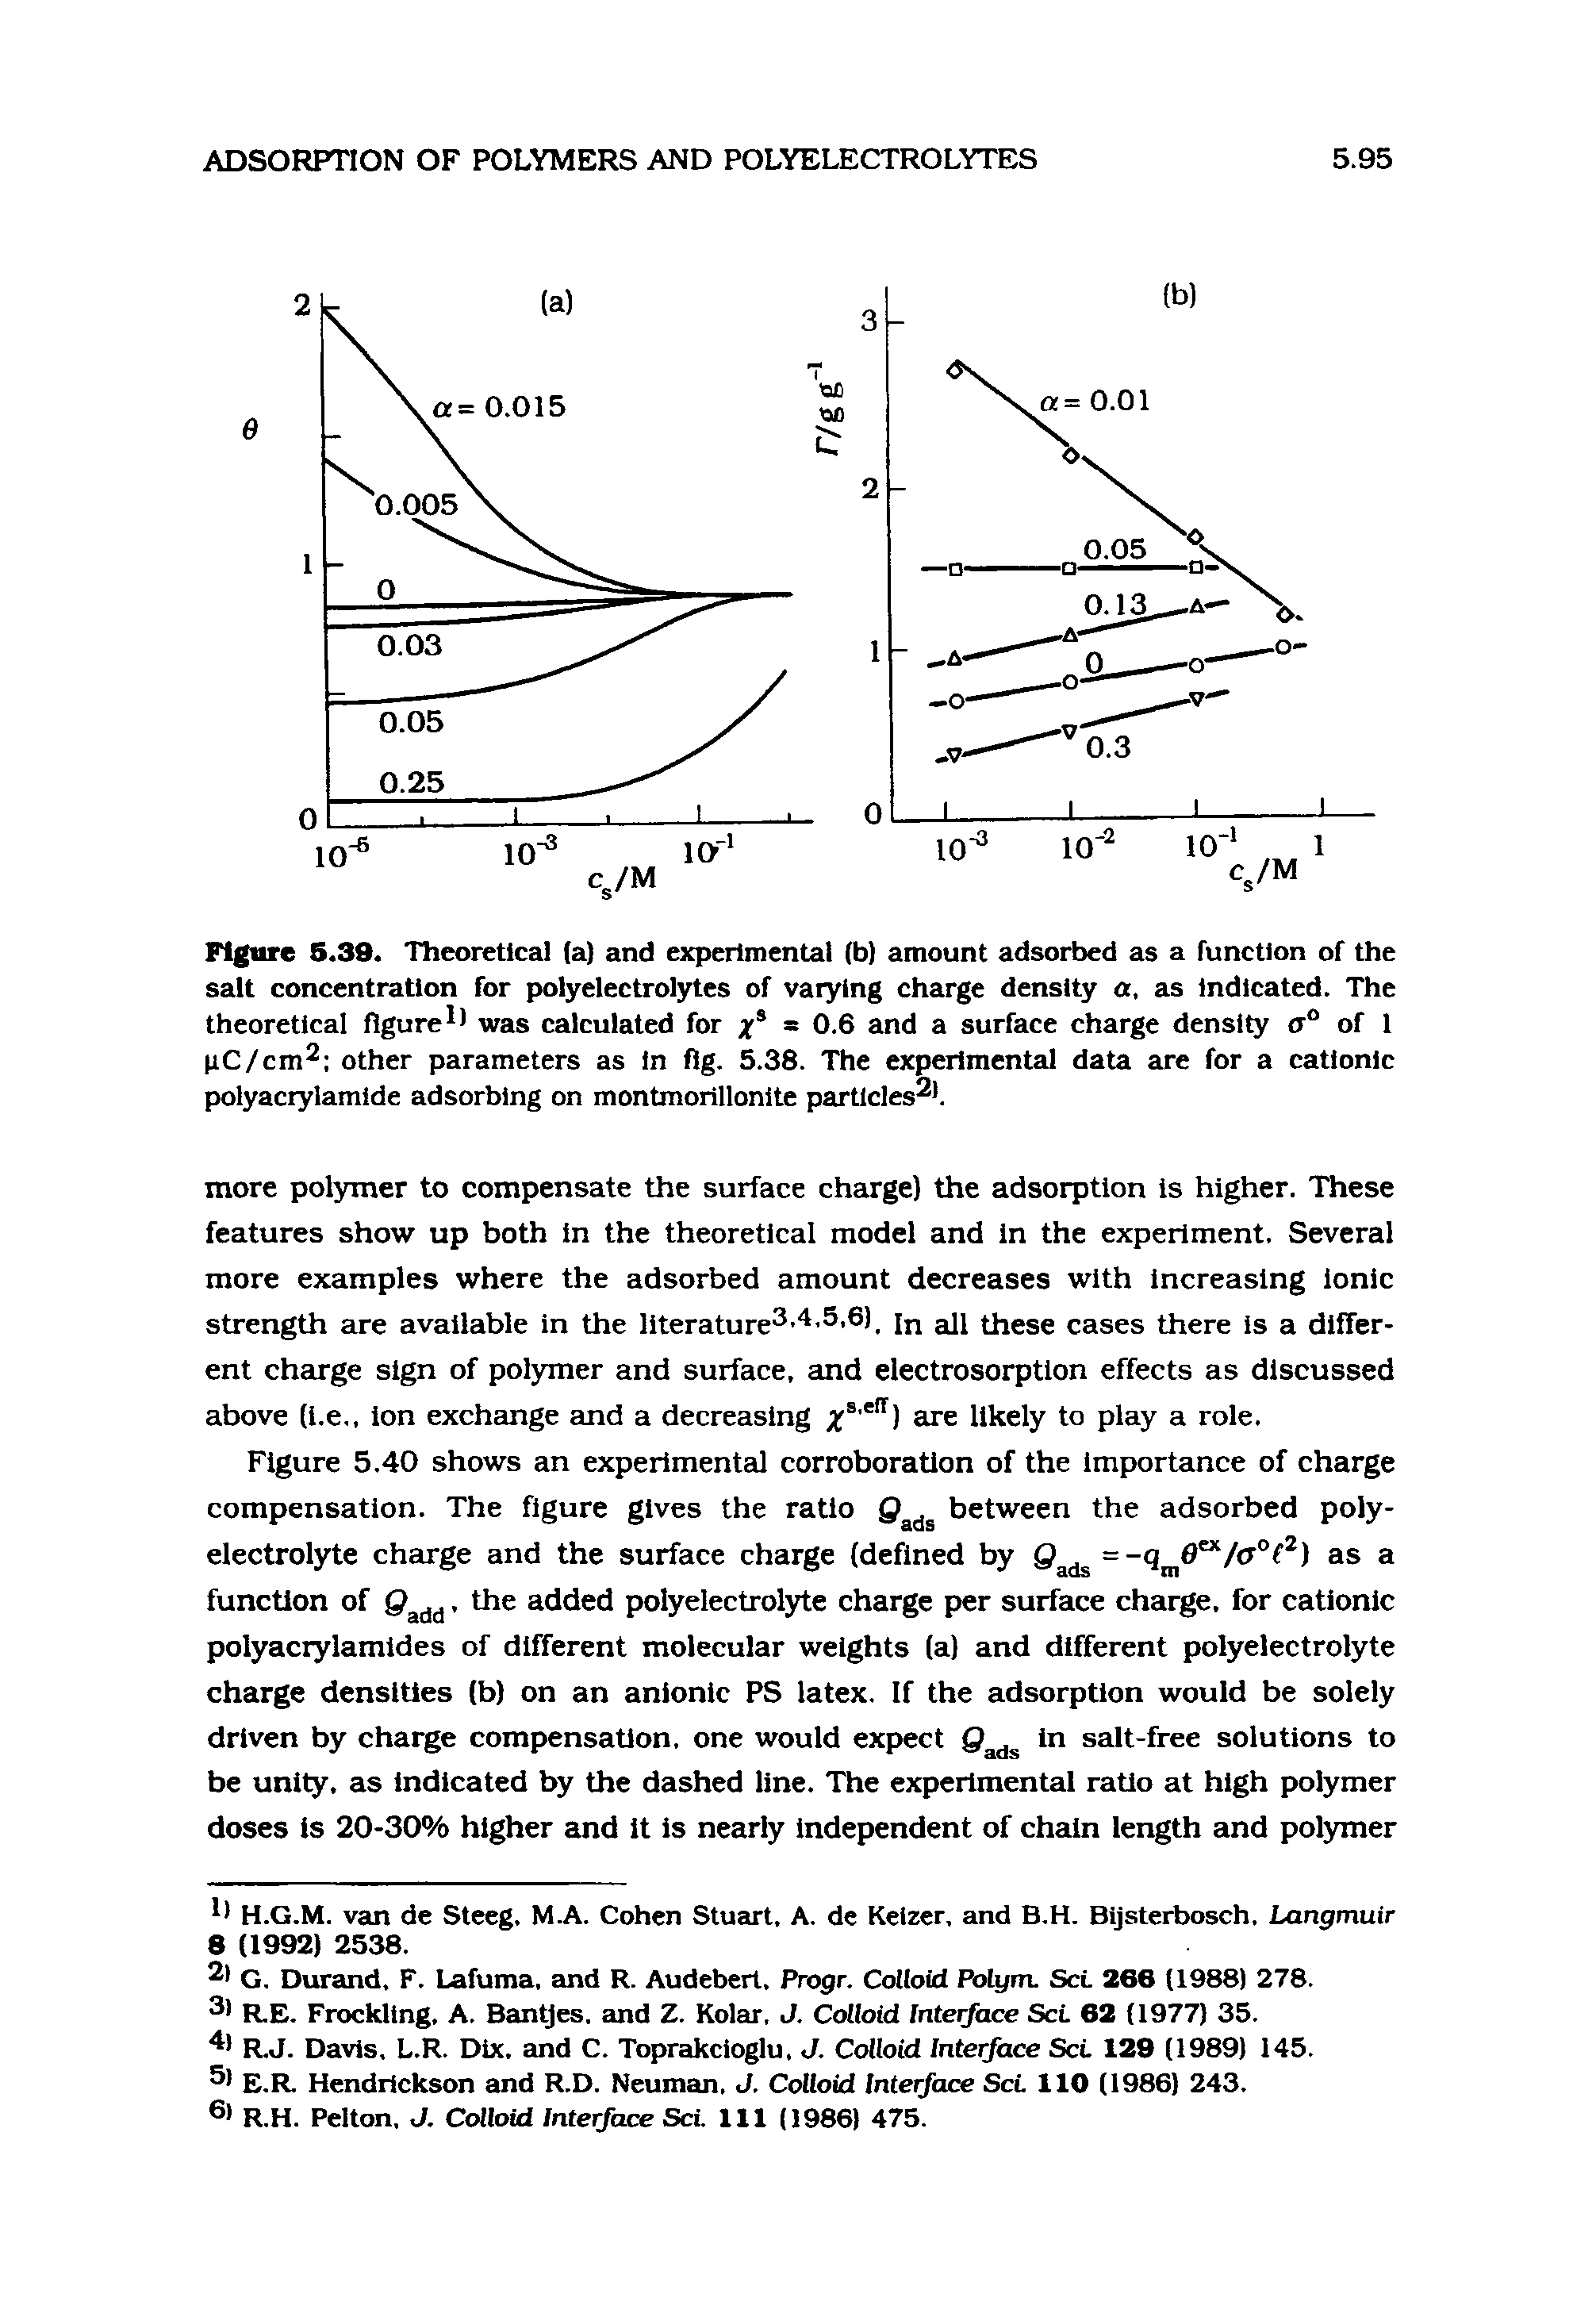 Figure 5.39. Theoretical (a) and experimental (b) amount adsorbed as a function of the salt concentration for polyelectrolytes of varying charge density a, as Indicated. The theoretical figure was calculated for 0-6 and a surface charge density <j° of 1 pC/cm other parameters as in fig. 5.38. The experimental data are for a cationic polyacrylamide adsorbing on montmoiillonite particles. ...